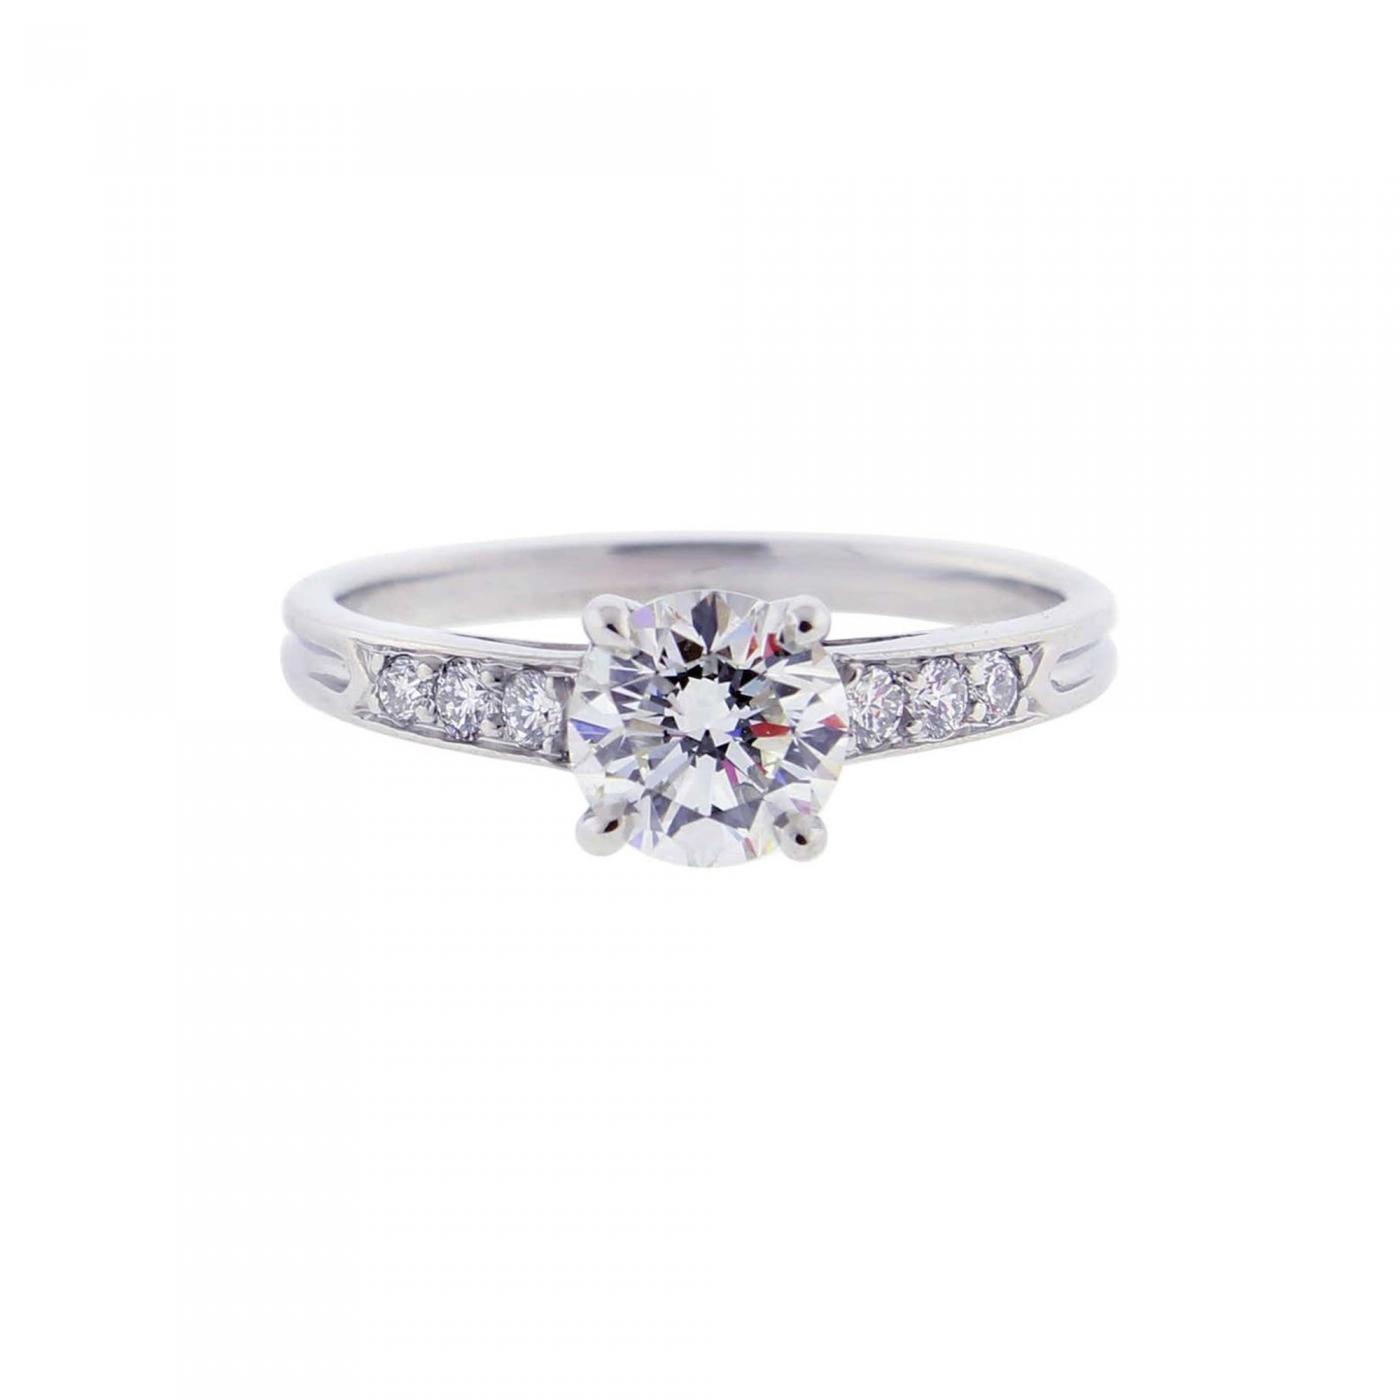 Tiffany & Co. Diamond Solitaire Engagement Ring Platinum 950 Lucida Cut  .33ct - Wilson Brothers Jewelry